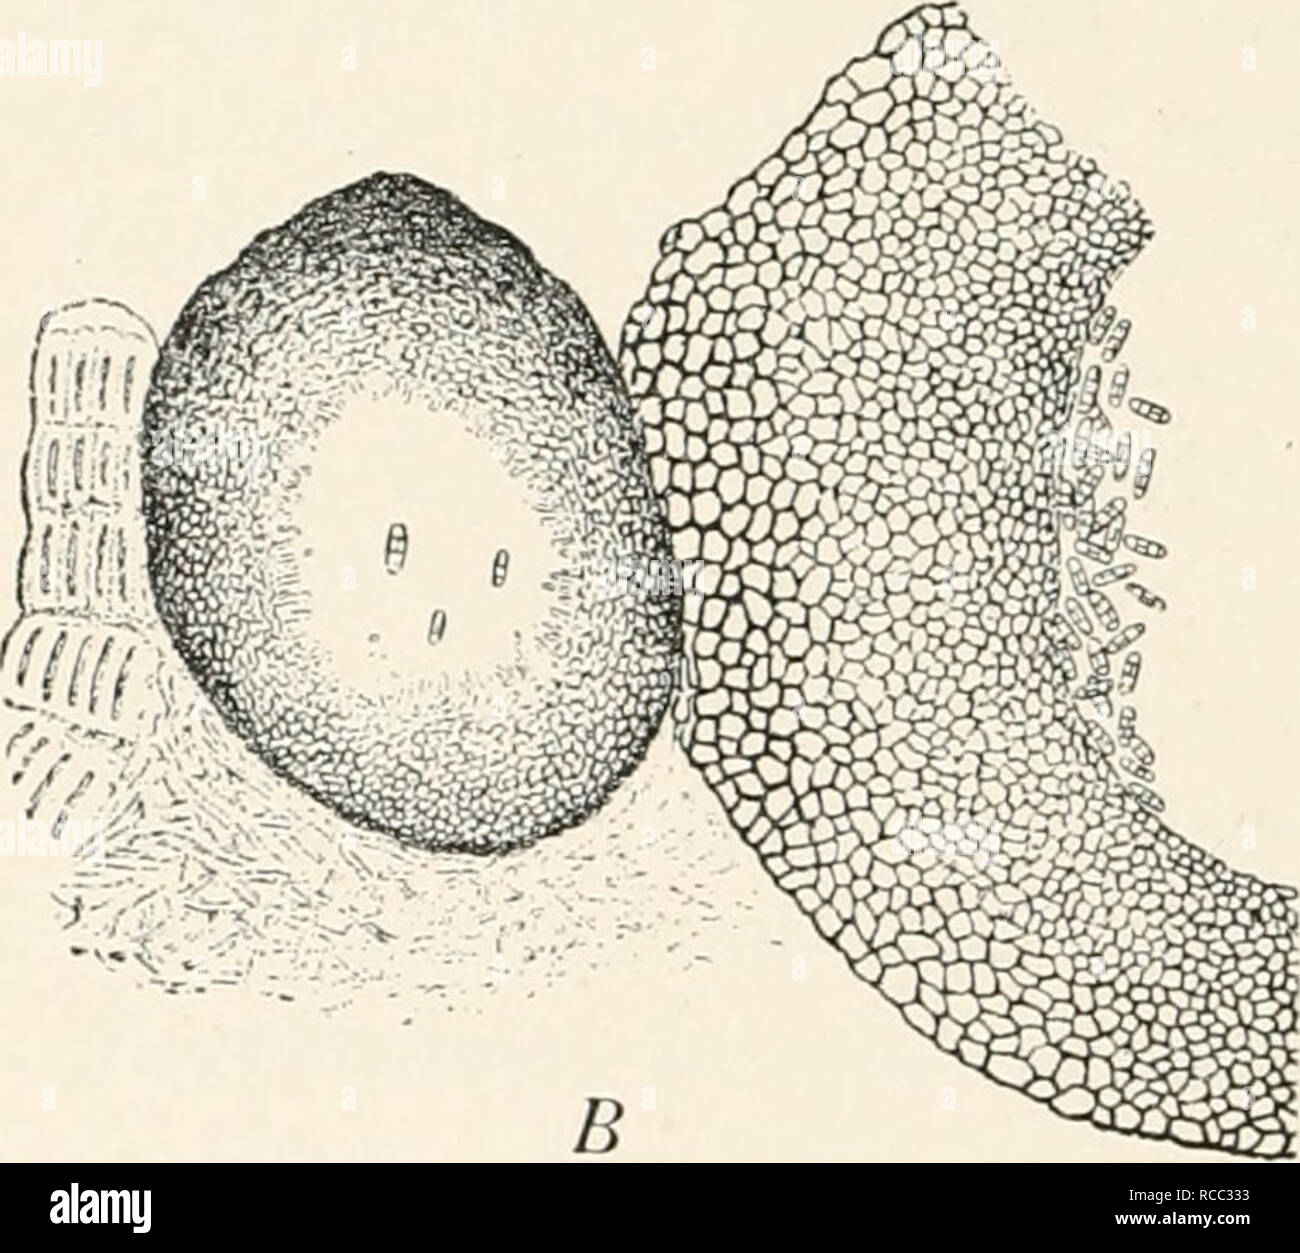 . Diseases of plants induced by cryptogamuc parasites; introduction to the study of pathogenic fungi, slime-fungi, bacteria, and algae. English ed. by William G. Smith. Plant diseases; Parasitic plants. Fig. 99.—Cucurbitaria laburni.. A, Stroma with pycnidia containing minute unicellular conidia. B, One of the large smooth pycnidia. (After v. Tubeuf.) The mature perithecia have a peridium consisting of a loose pseudoparenchyma with a rough warty exterior and a pore set in a distinct depression (Fig. 100.) The paraphyses are long, strong threads, often branched, and between them arise the long  Stock Photo